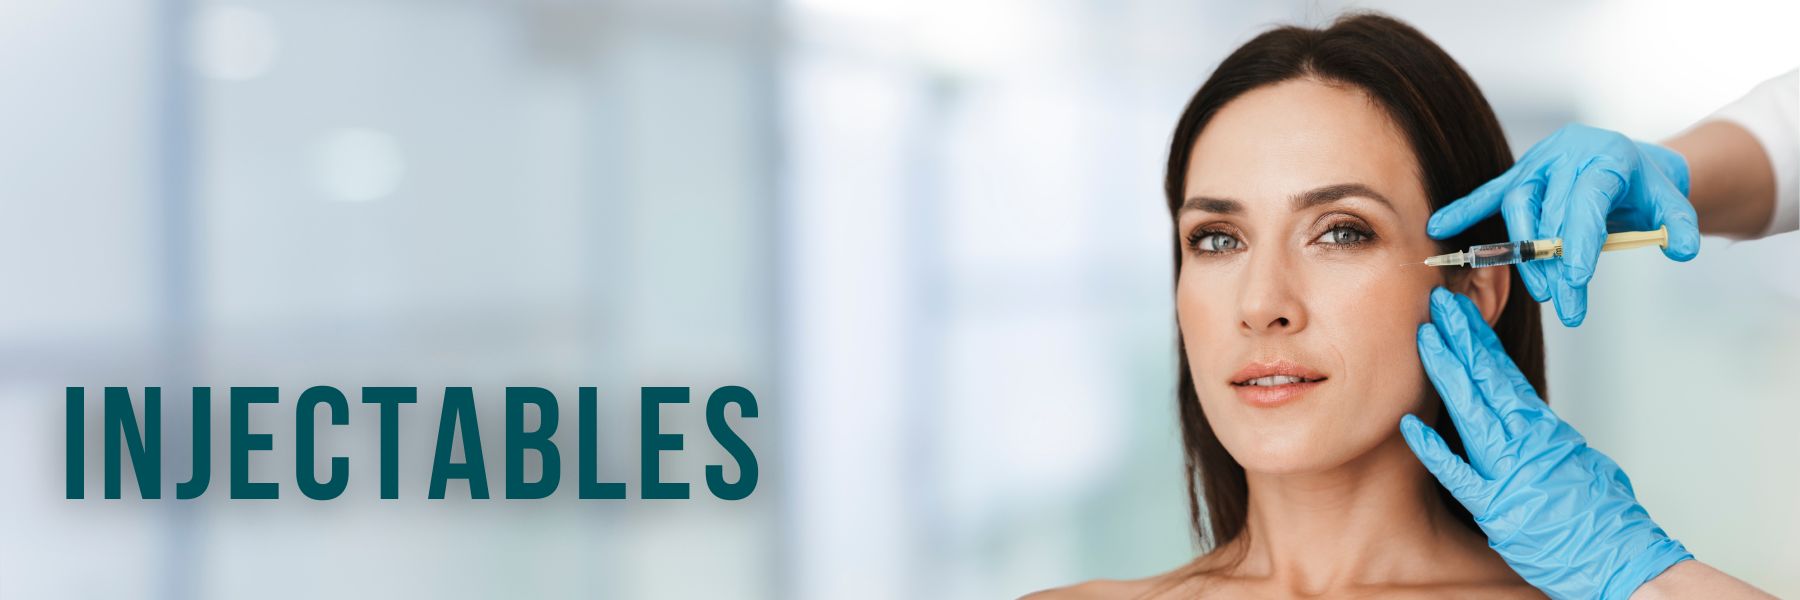 Header image of a women getting a forehead injection that says "injectables"